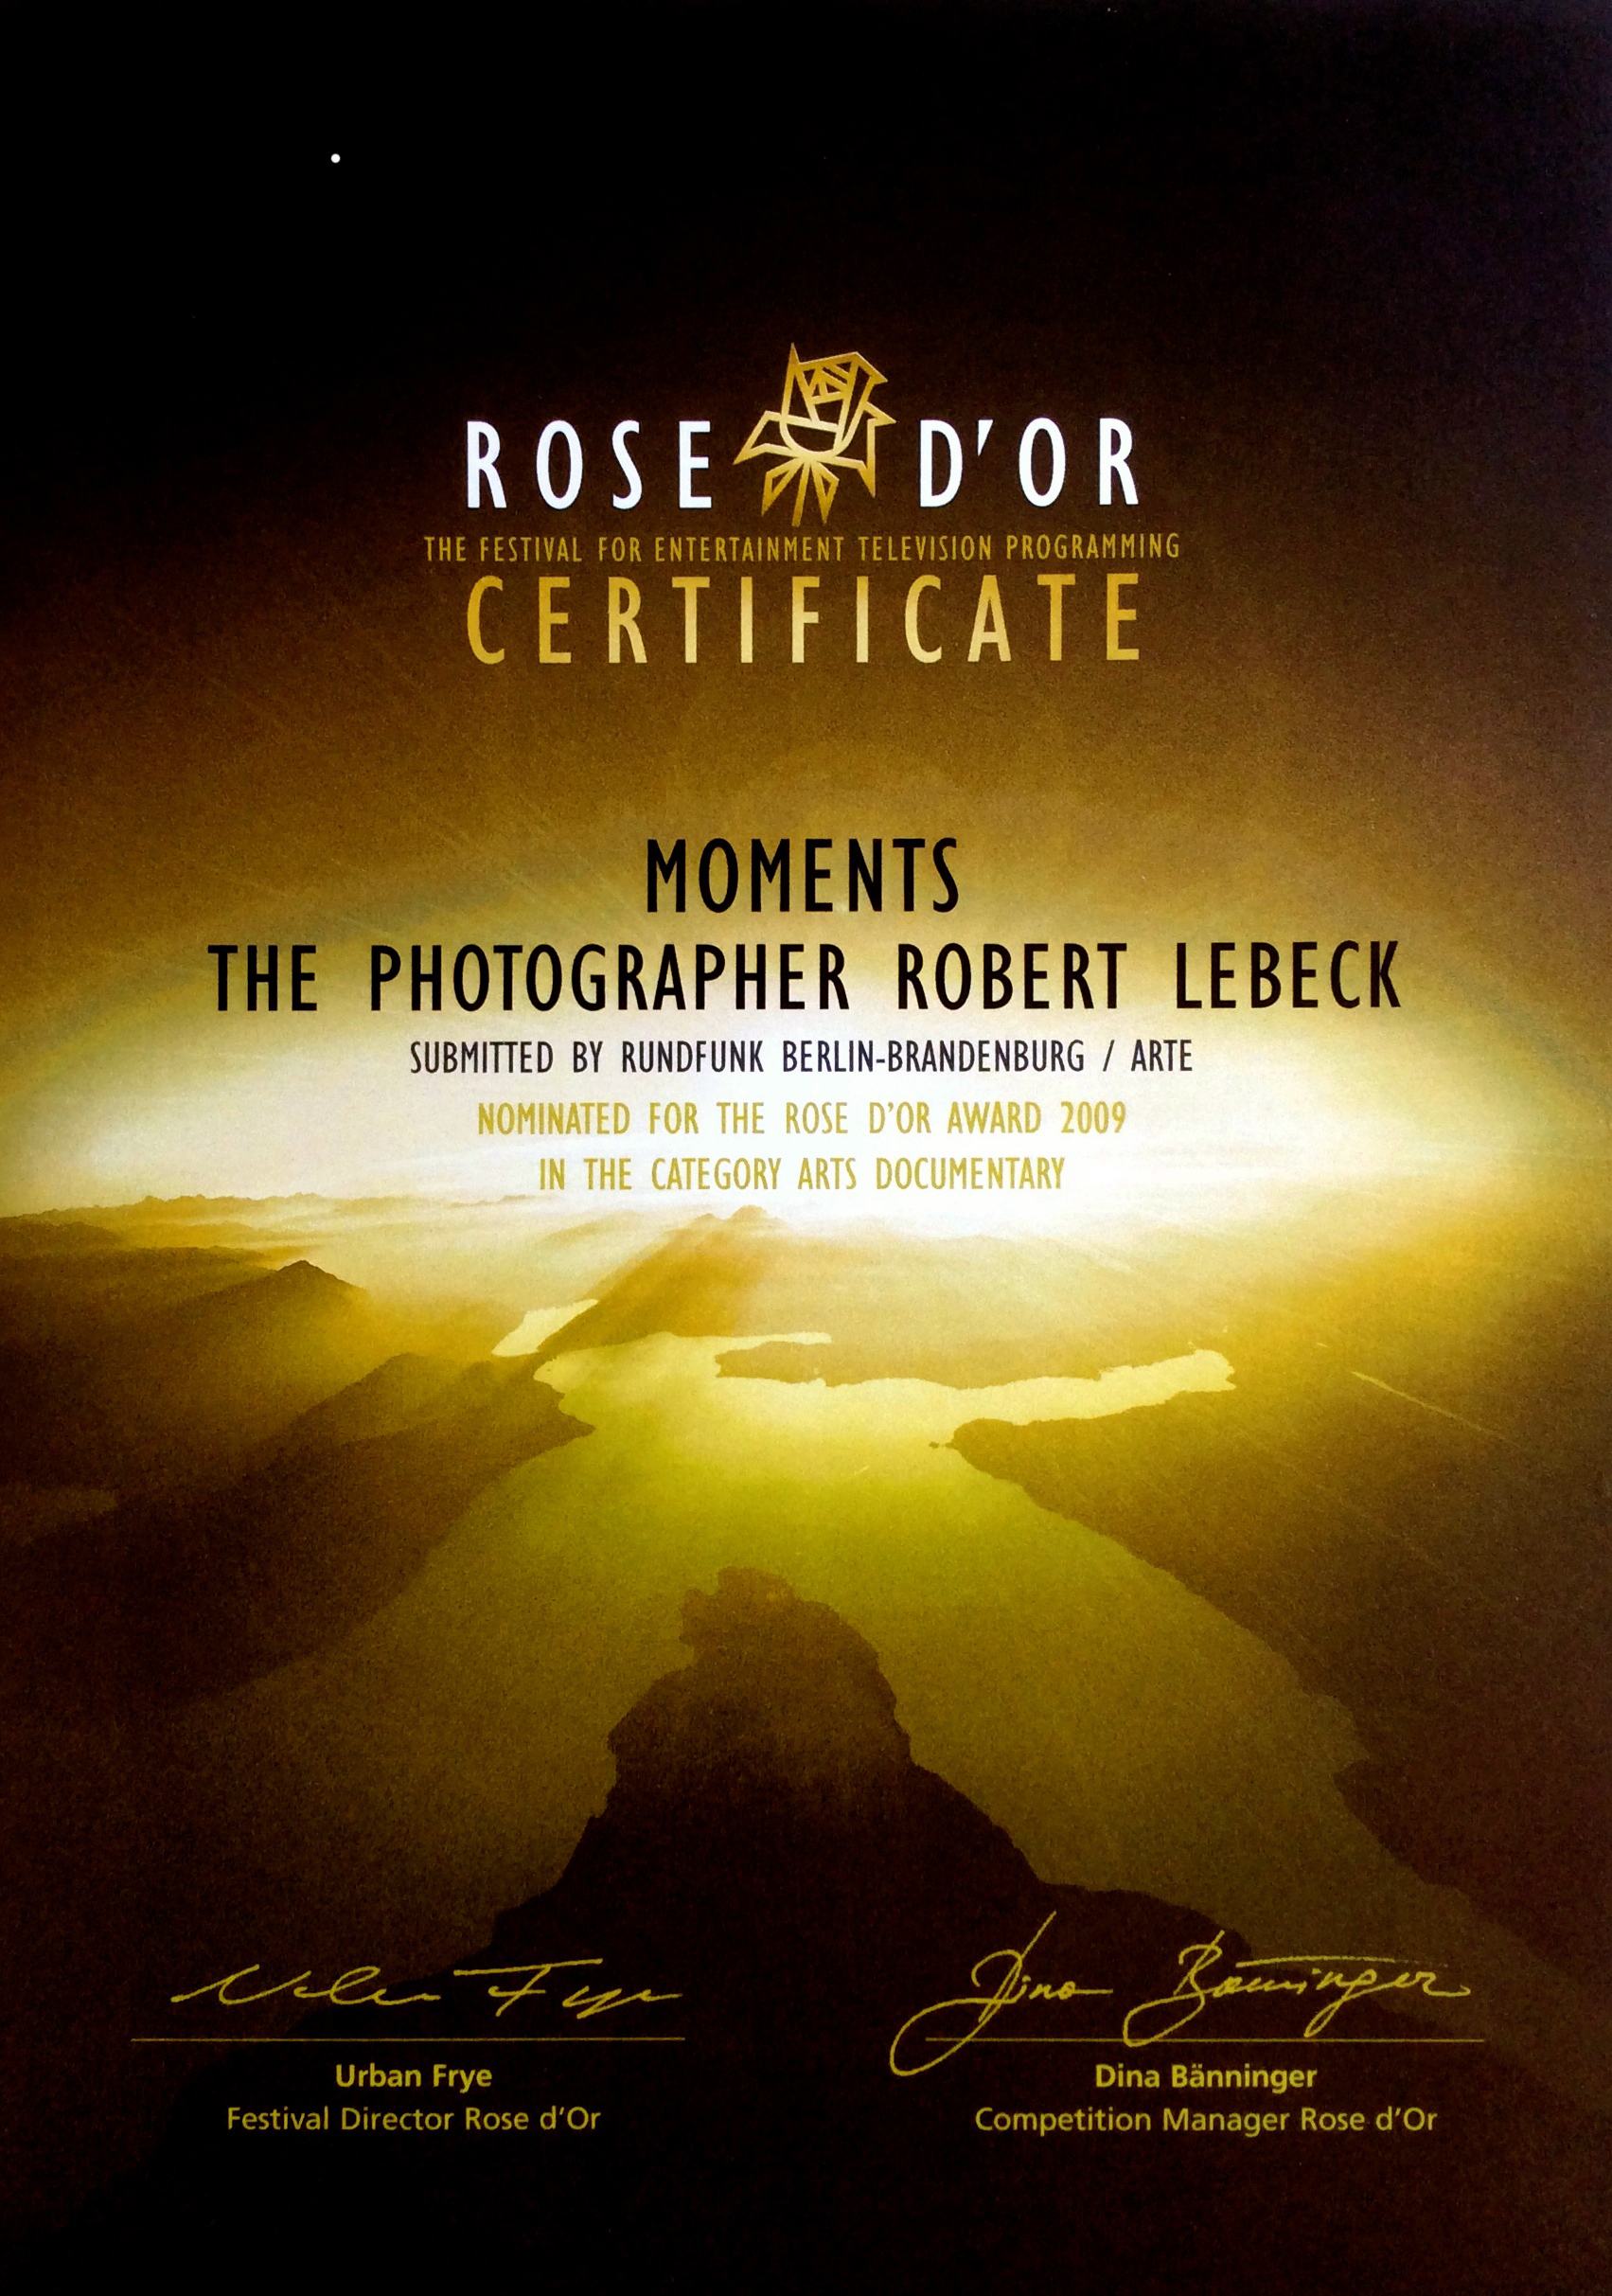 ROSE D'OR Certificate for the ARTE Documentary 